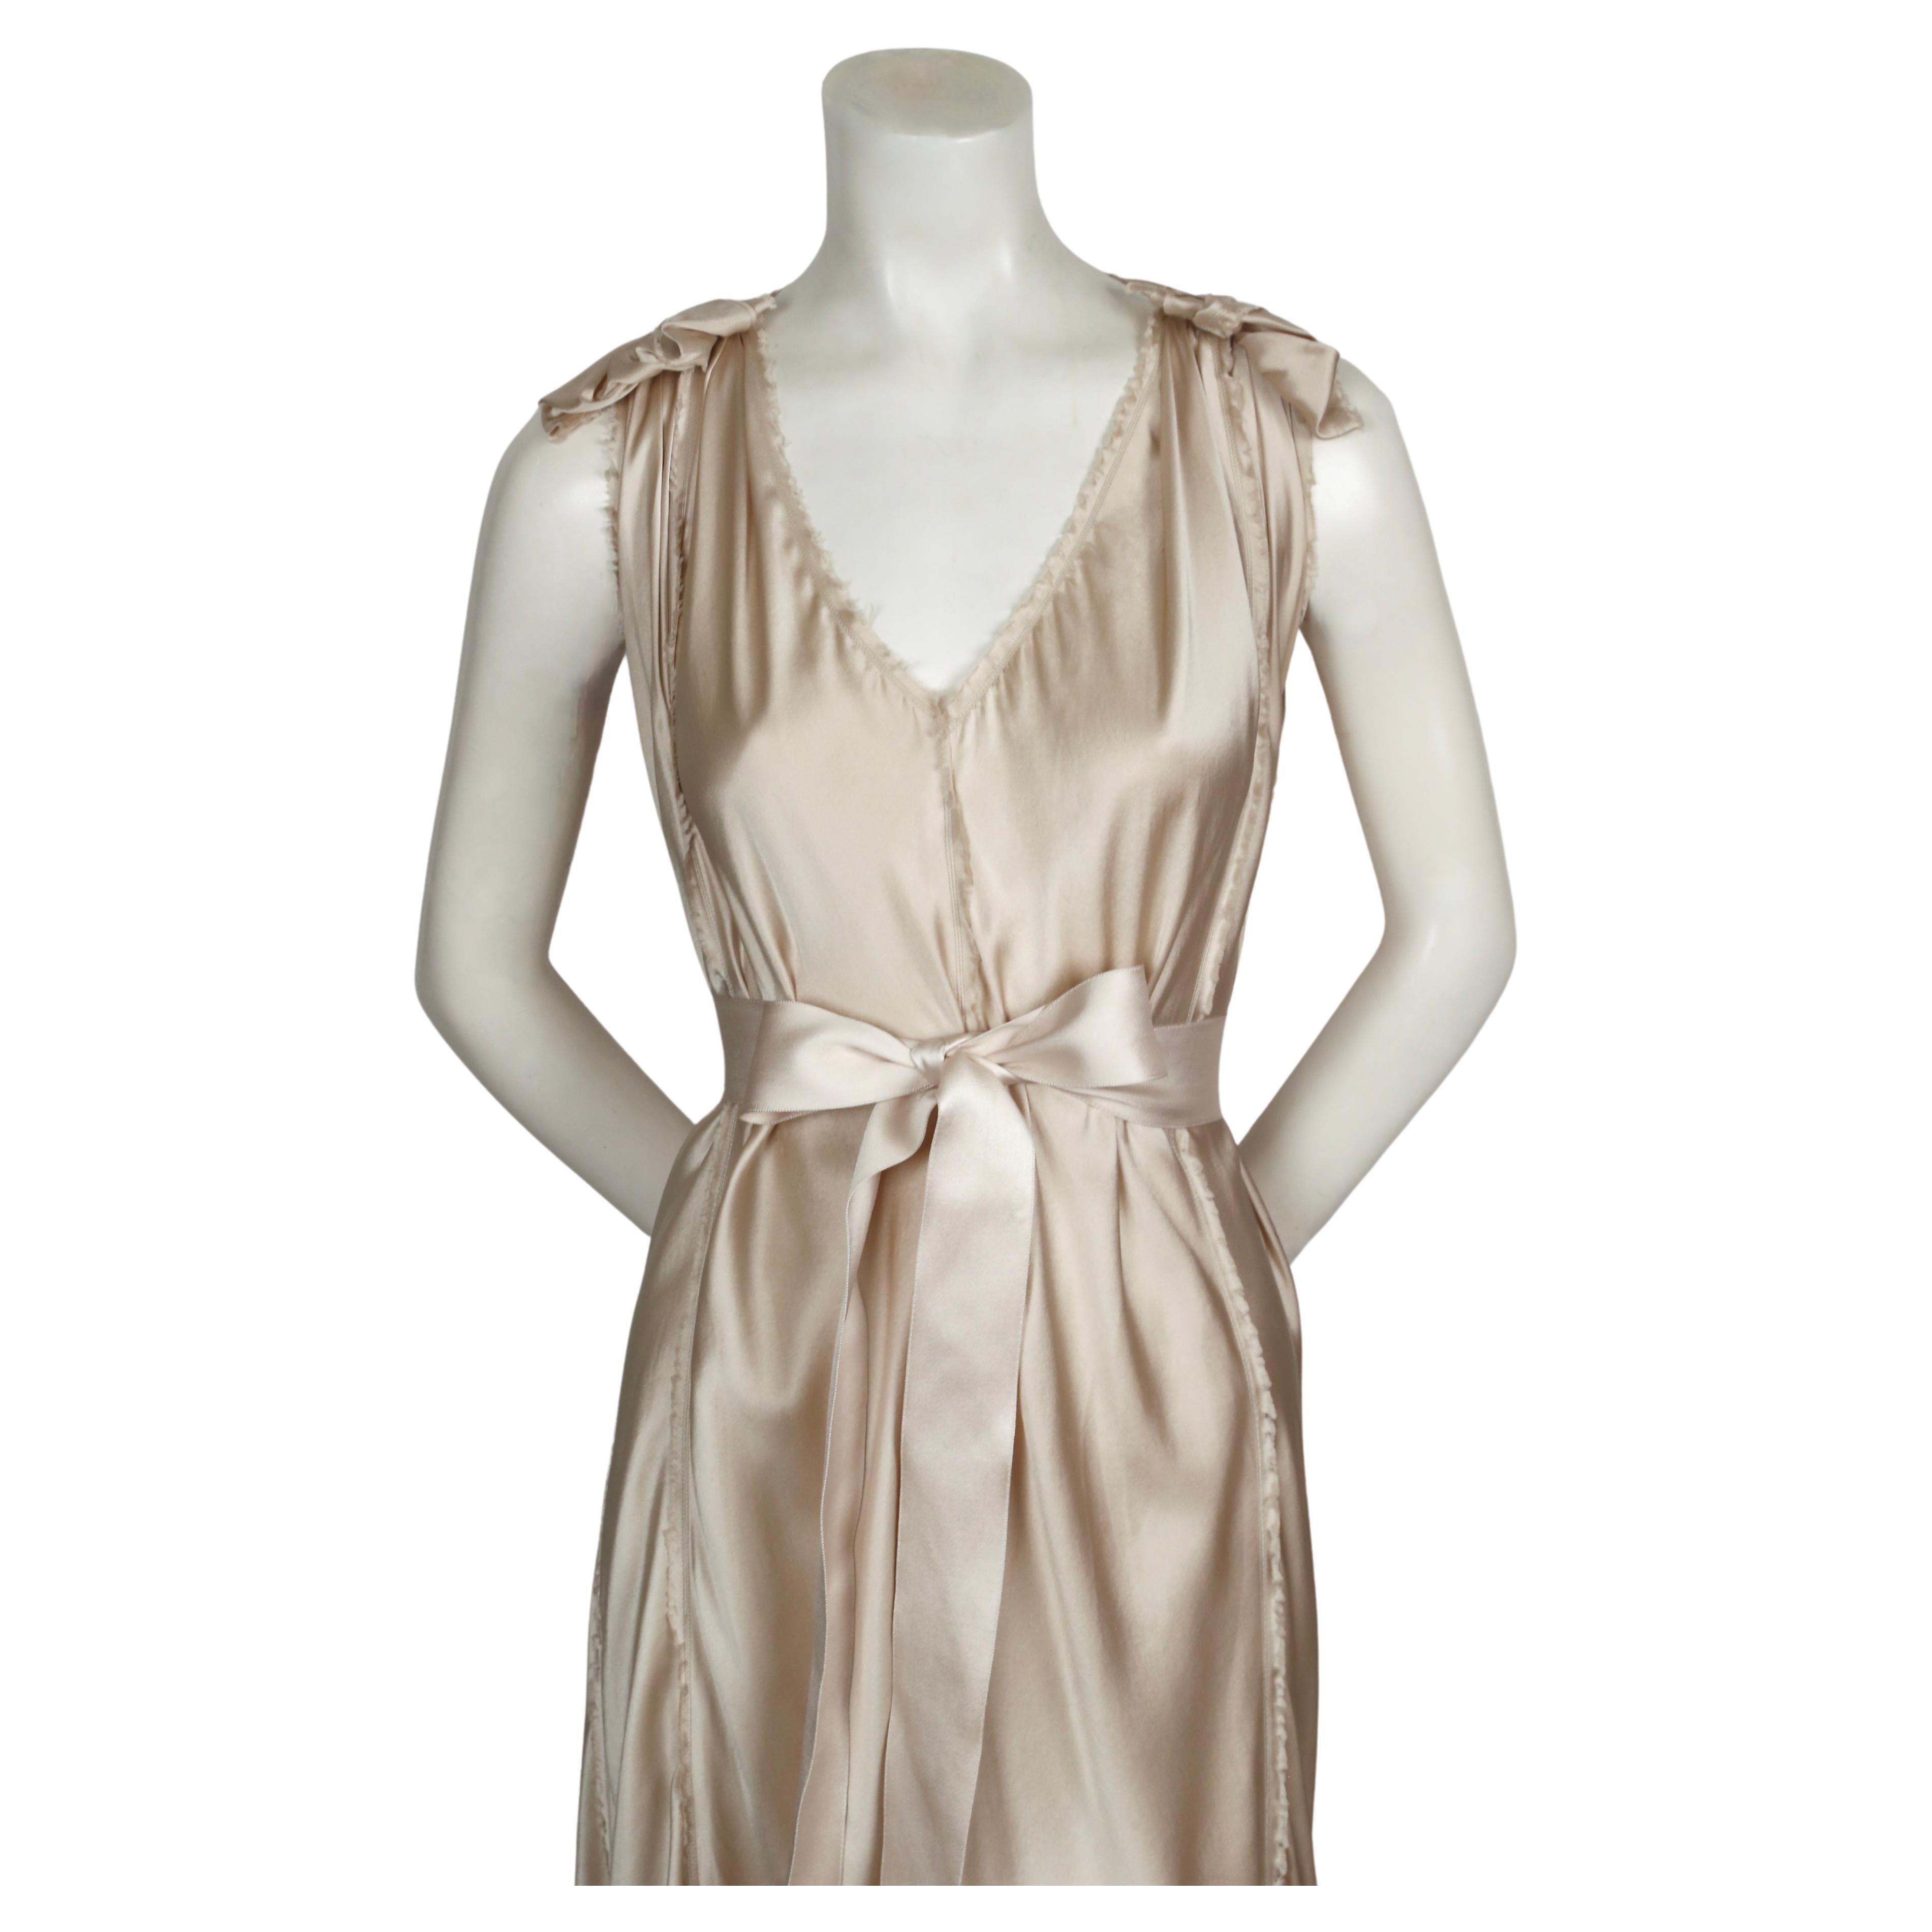 2008 LANVIN by Alber Elbaz silk Grecian style wedding dress In Good Condition For Sale In San Fransisco, CA